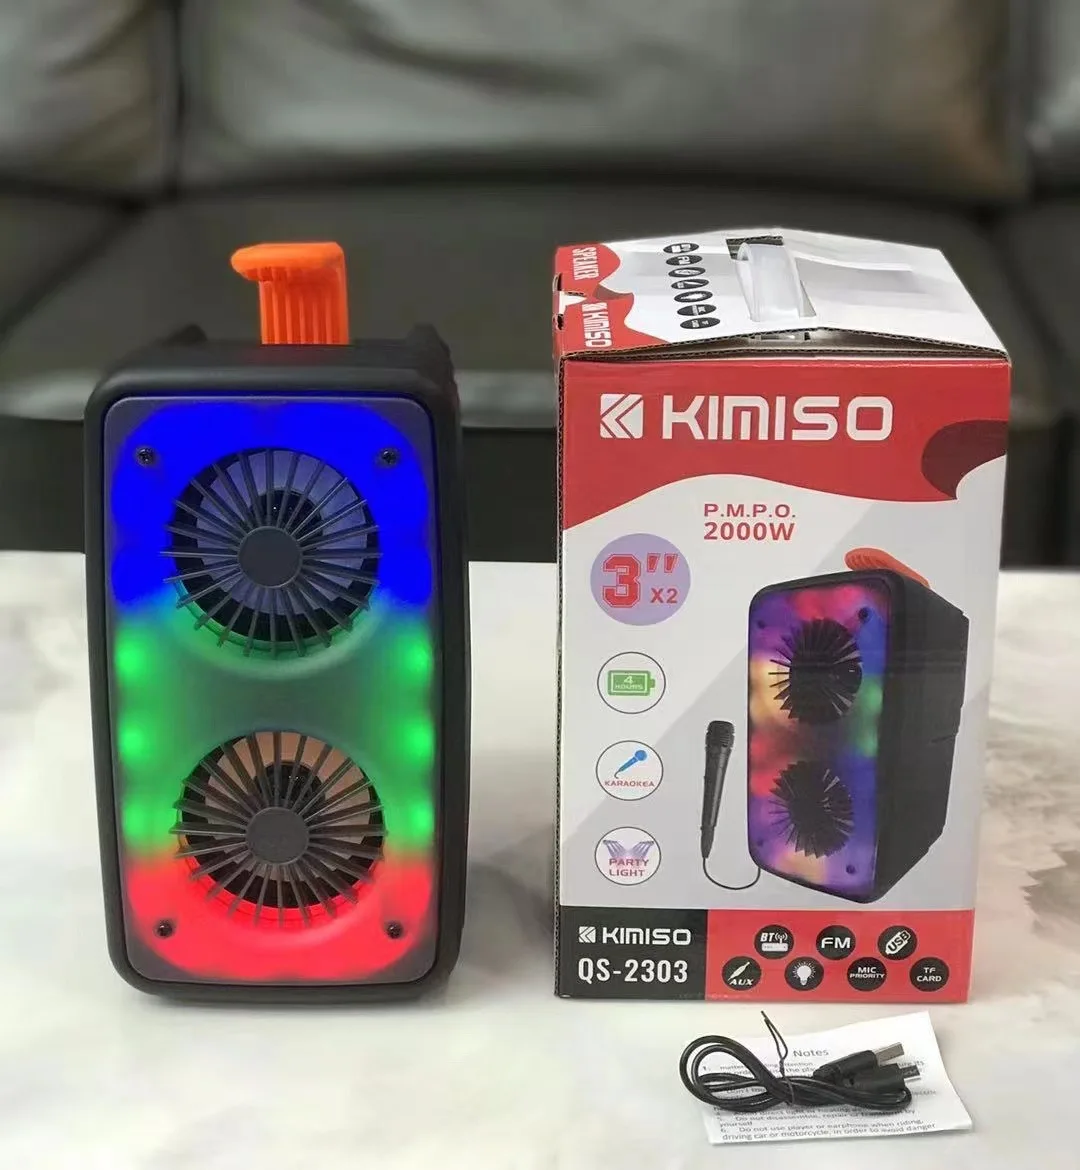 

qs-2303 Lowest Price Portable Wireless Speaker KIMISO Double 3inch Horn Small TWS Good Quality Speaker With RGB Lights